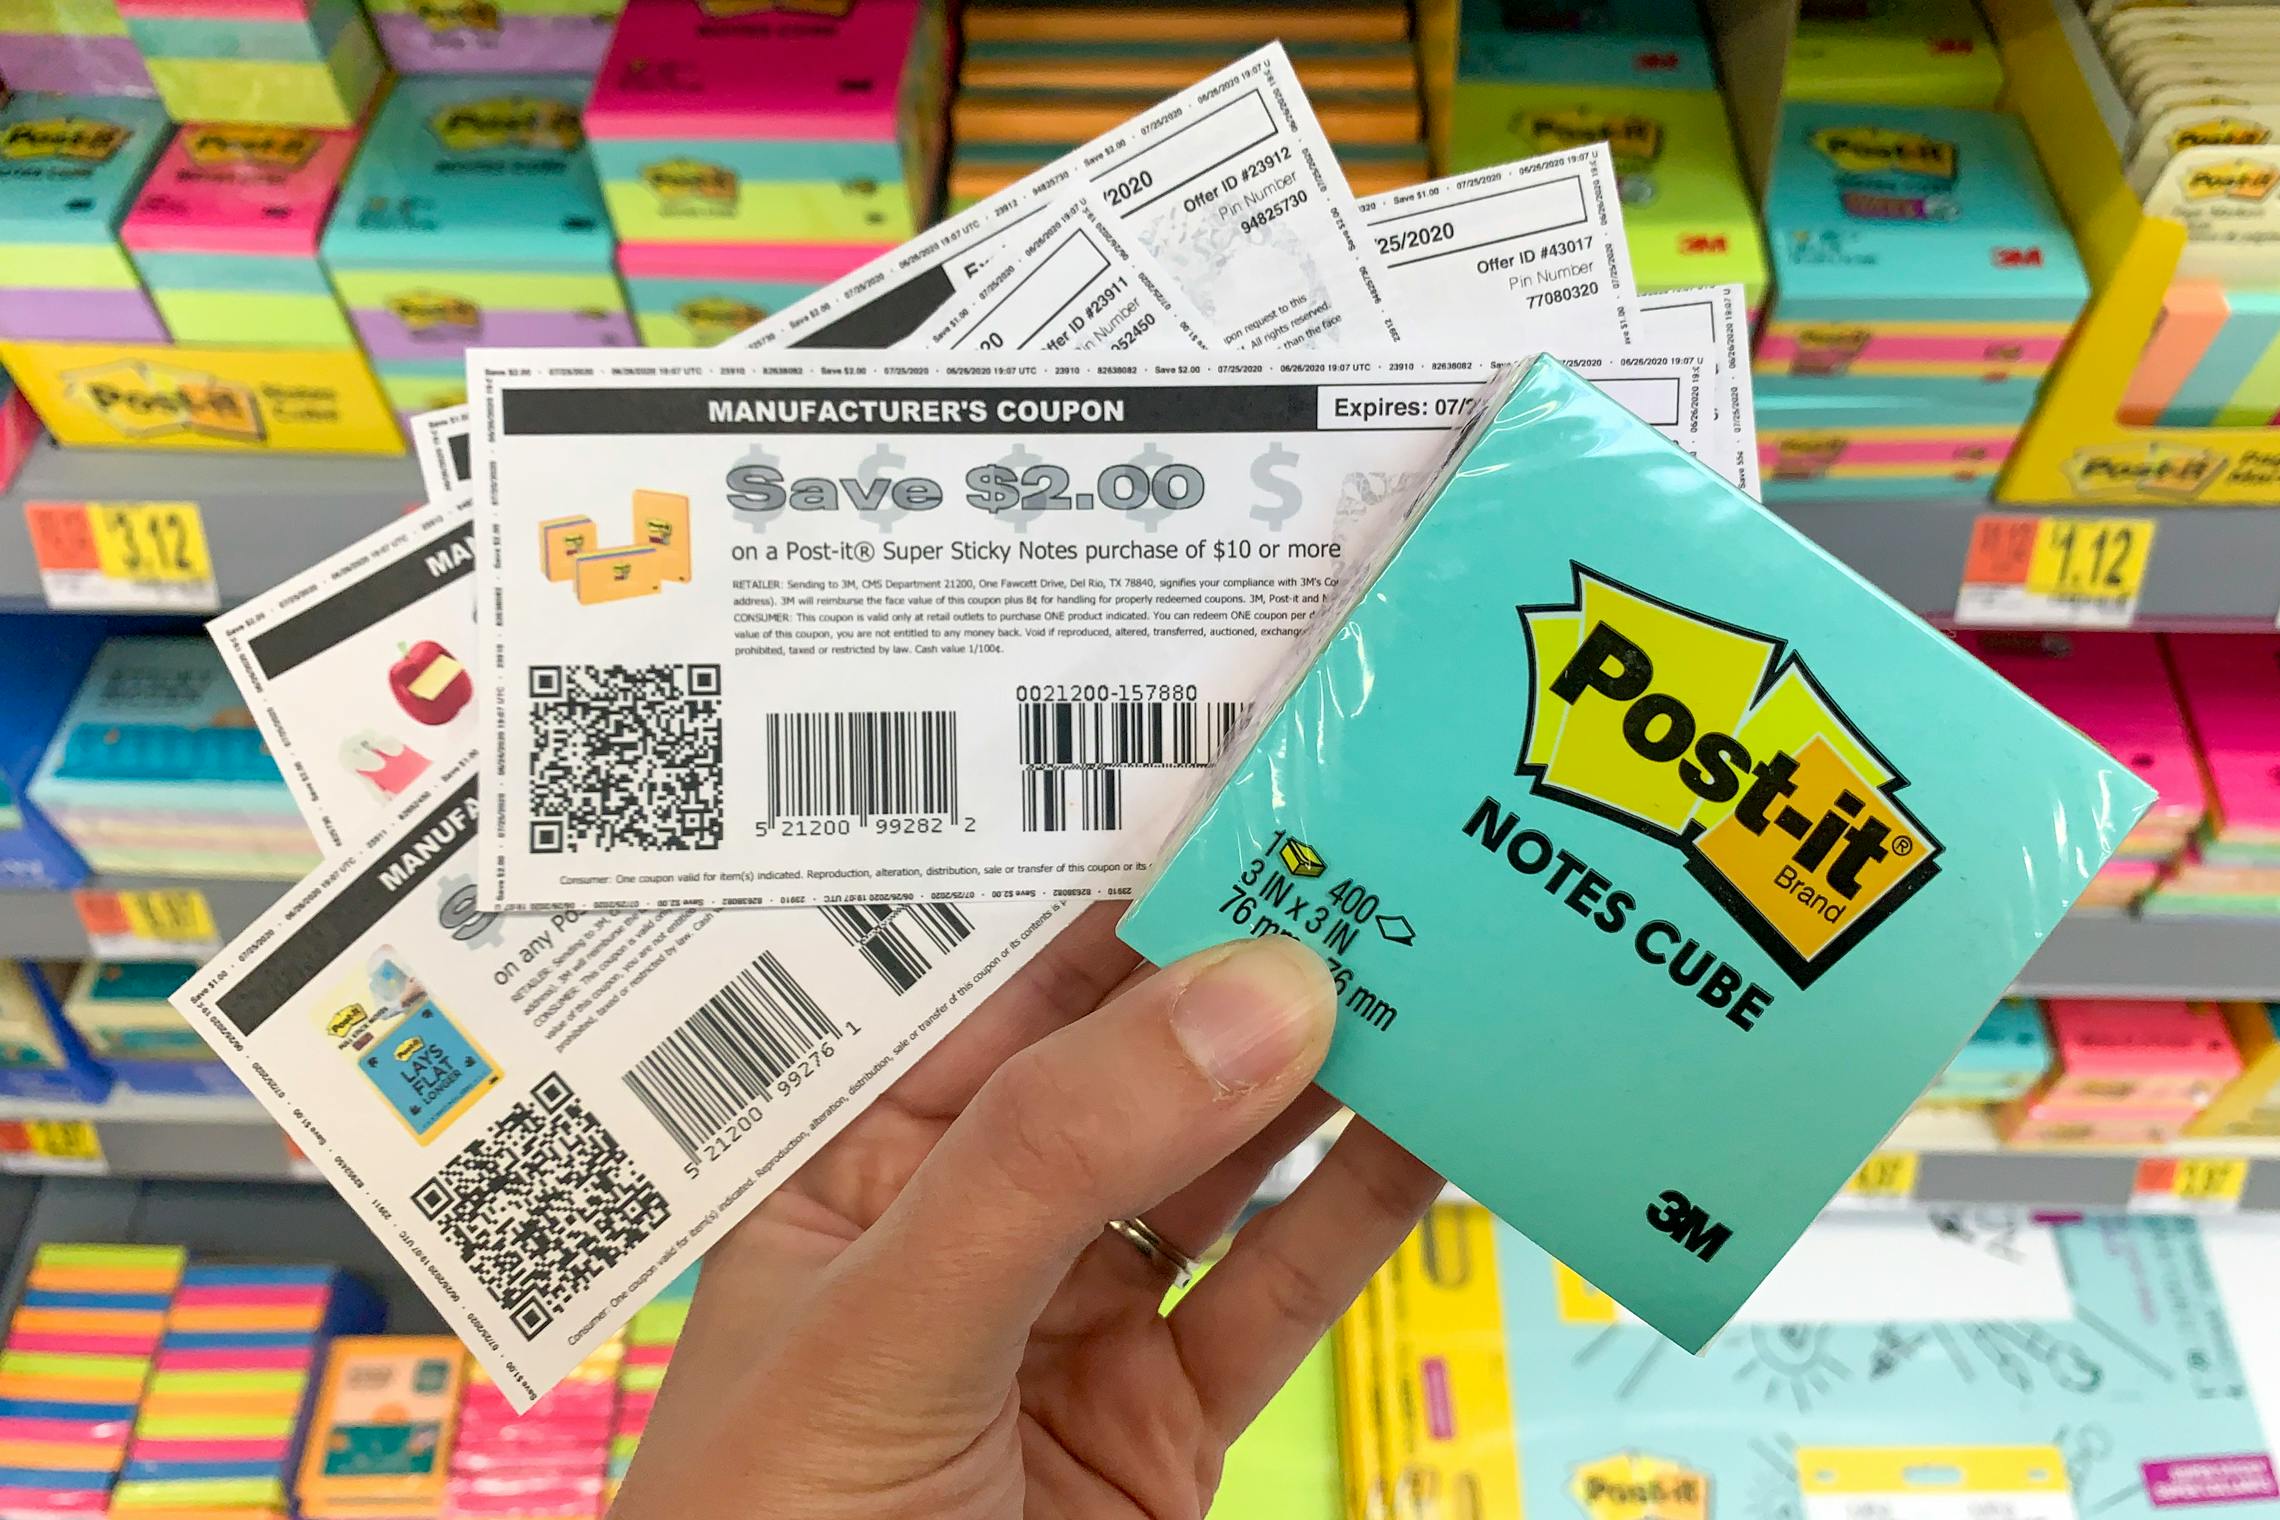 A pack of post-its held along with coupons